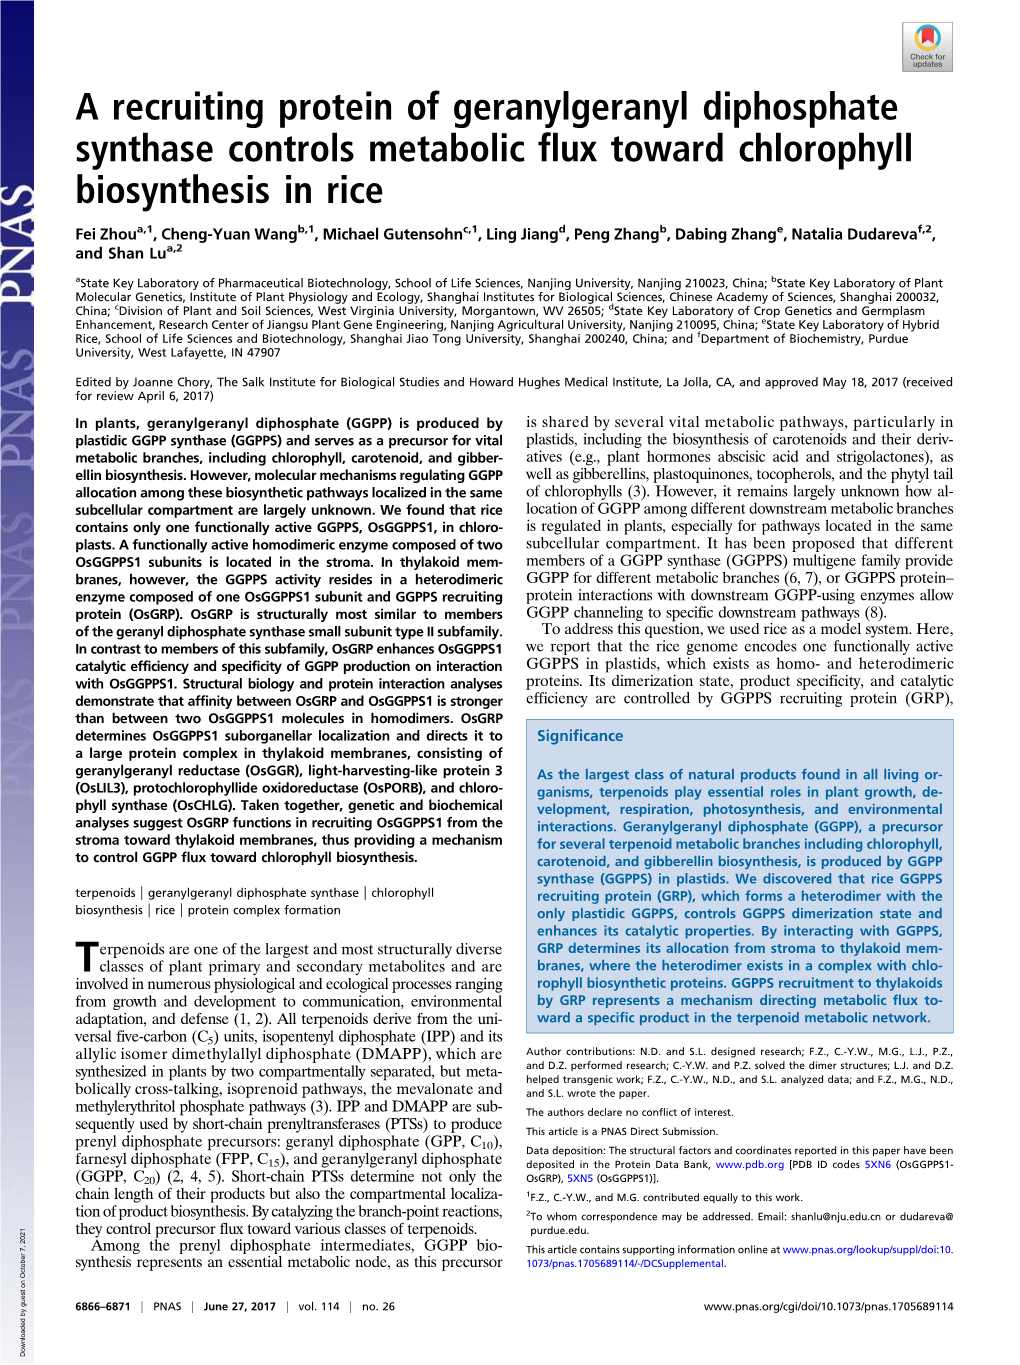 A Recruiting Protein of Geranylgeranyl Diphosphate Synthase Controls Metabolic Flux Toward Chlorophyll Biosynthesis in Rice